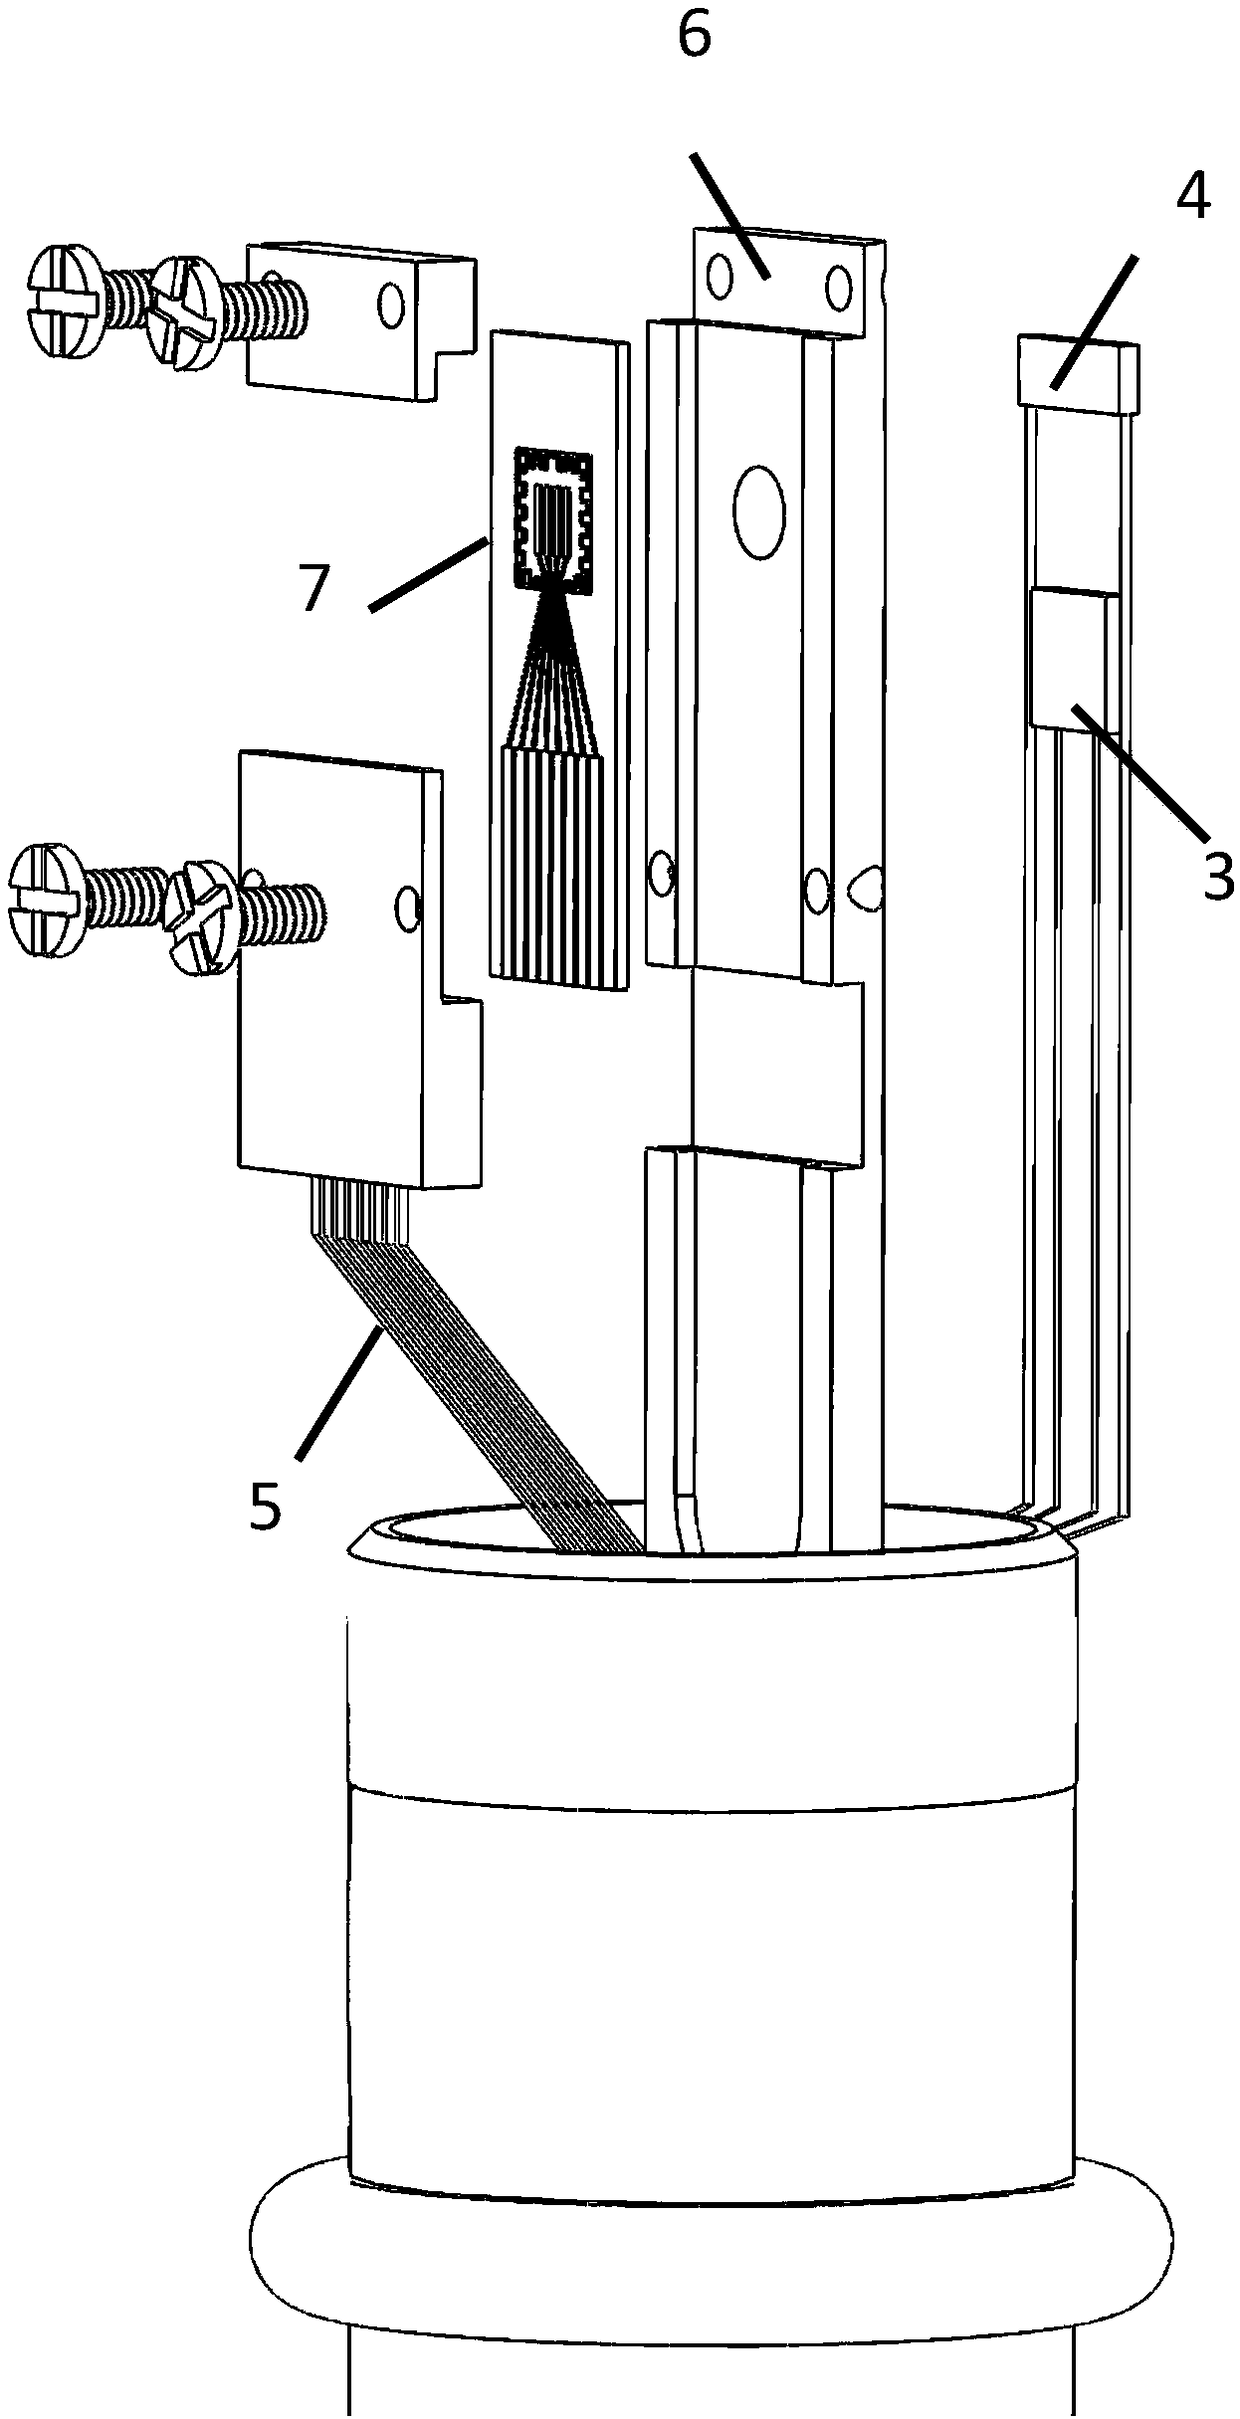 In-situ electrical sample rod system for transmission electron microscope